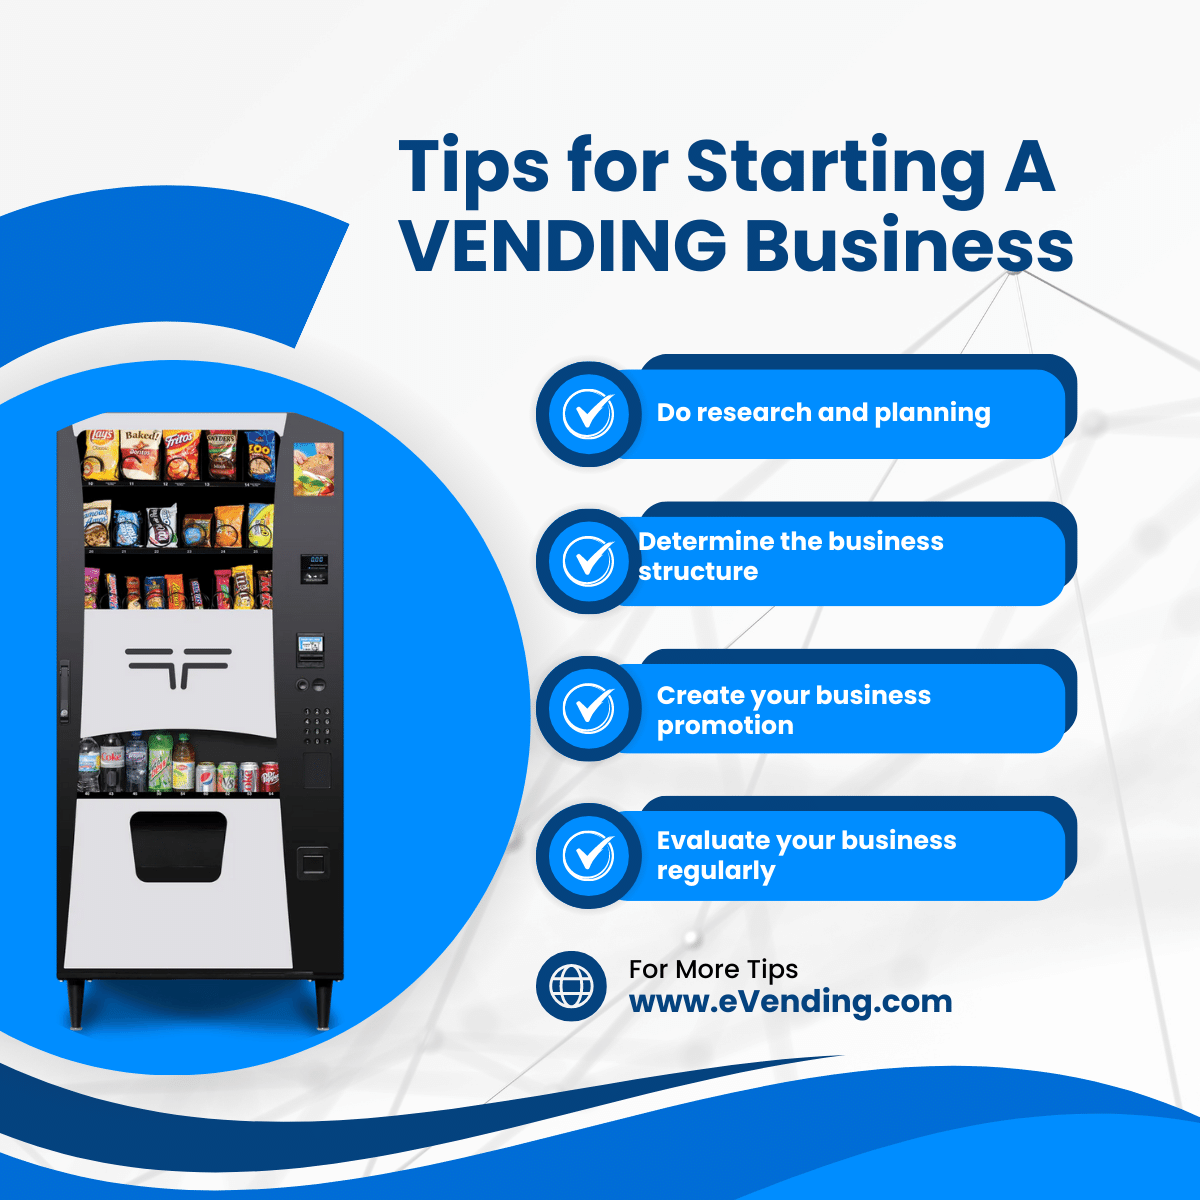 VENDING MACHINES MIGHT BE THE START OF A BRAND NEW BUSINESS FOR YOU